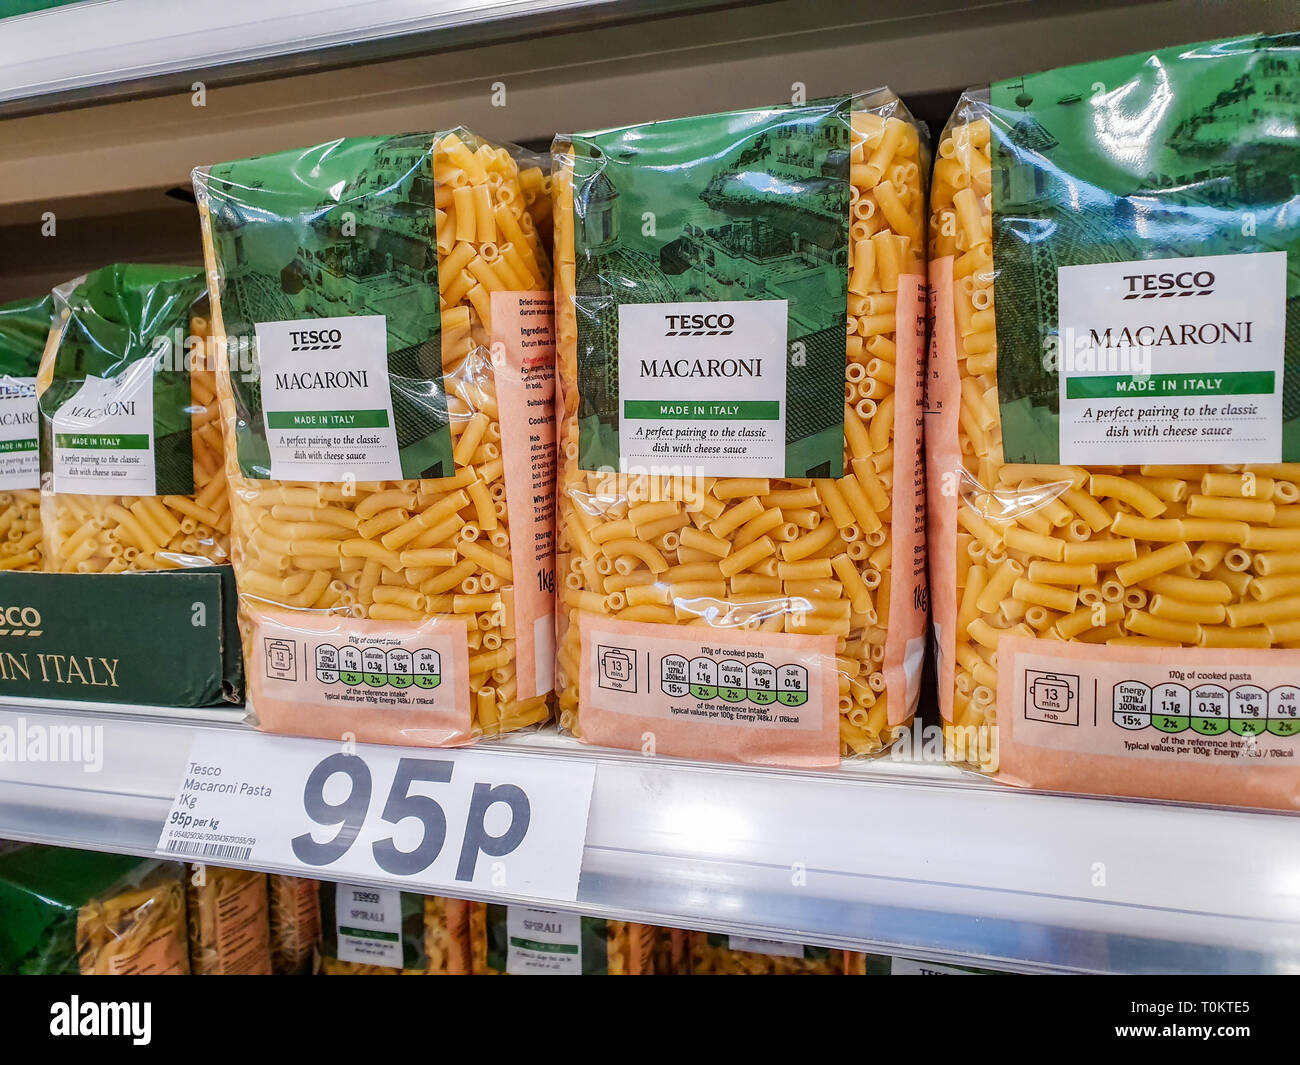 SHEFFIELD, UK - 20TH MARCH 2019: Tesco own brand Macaroni pasta for sale in Sheffield Stock Photo